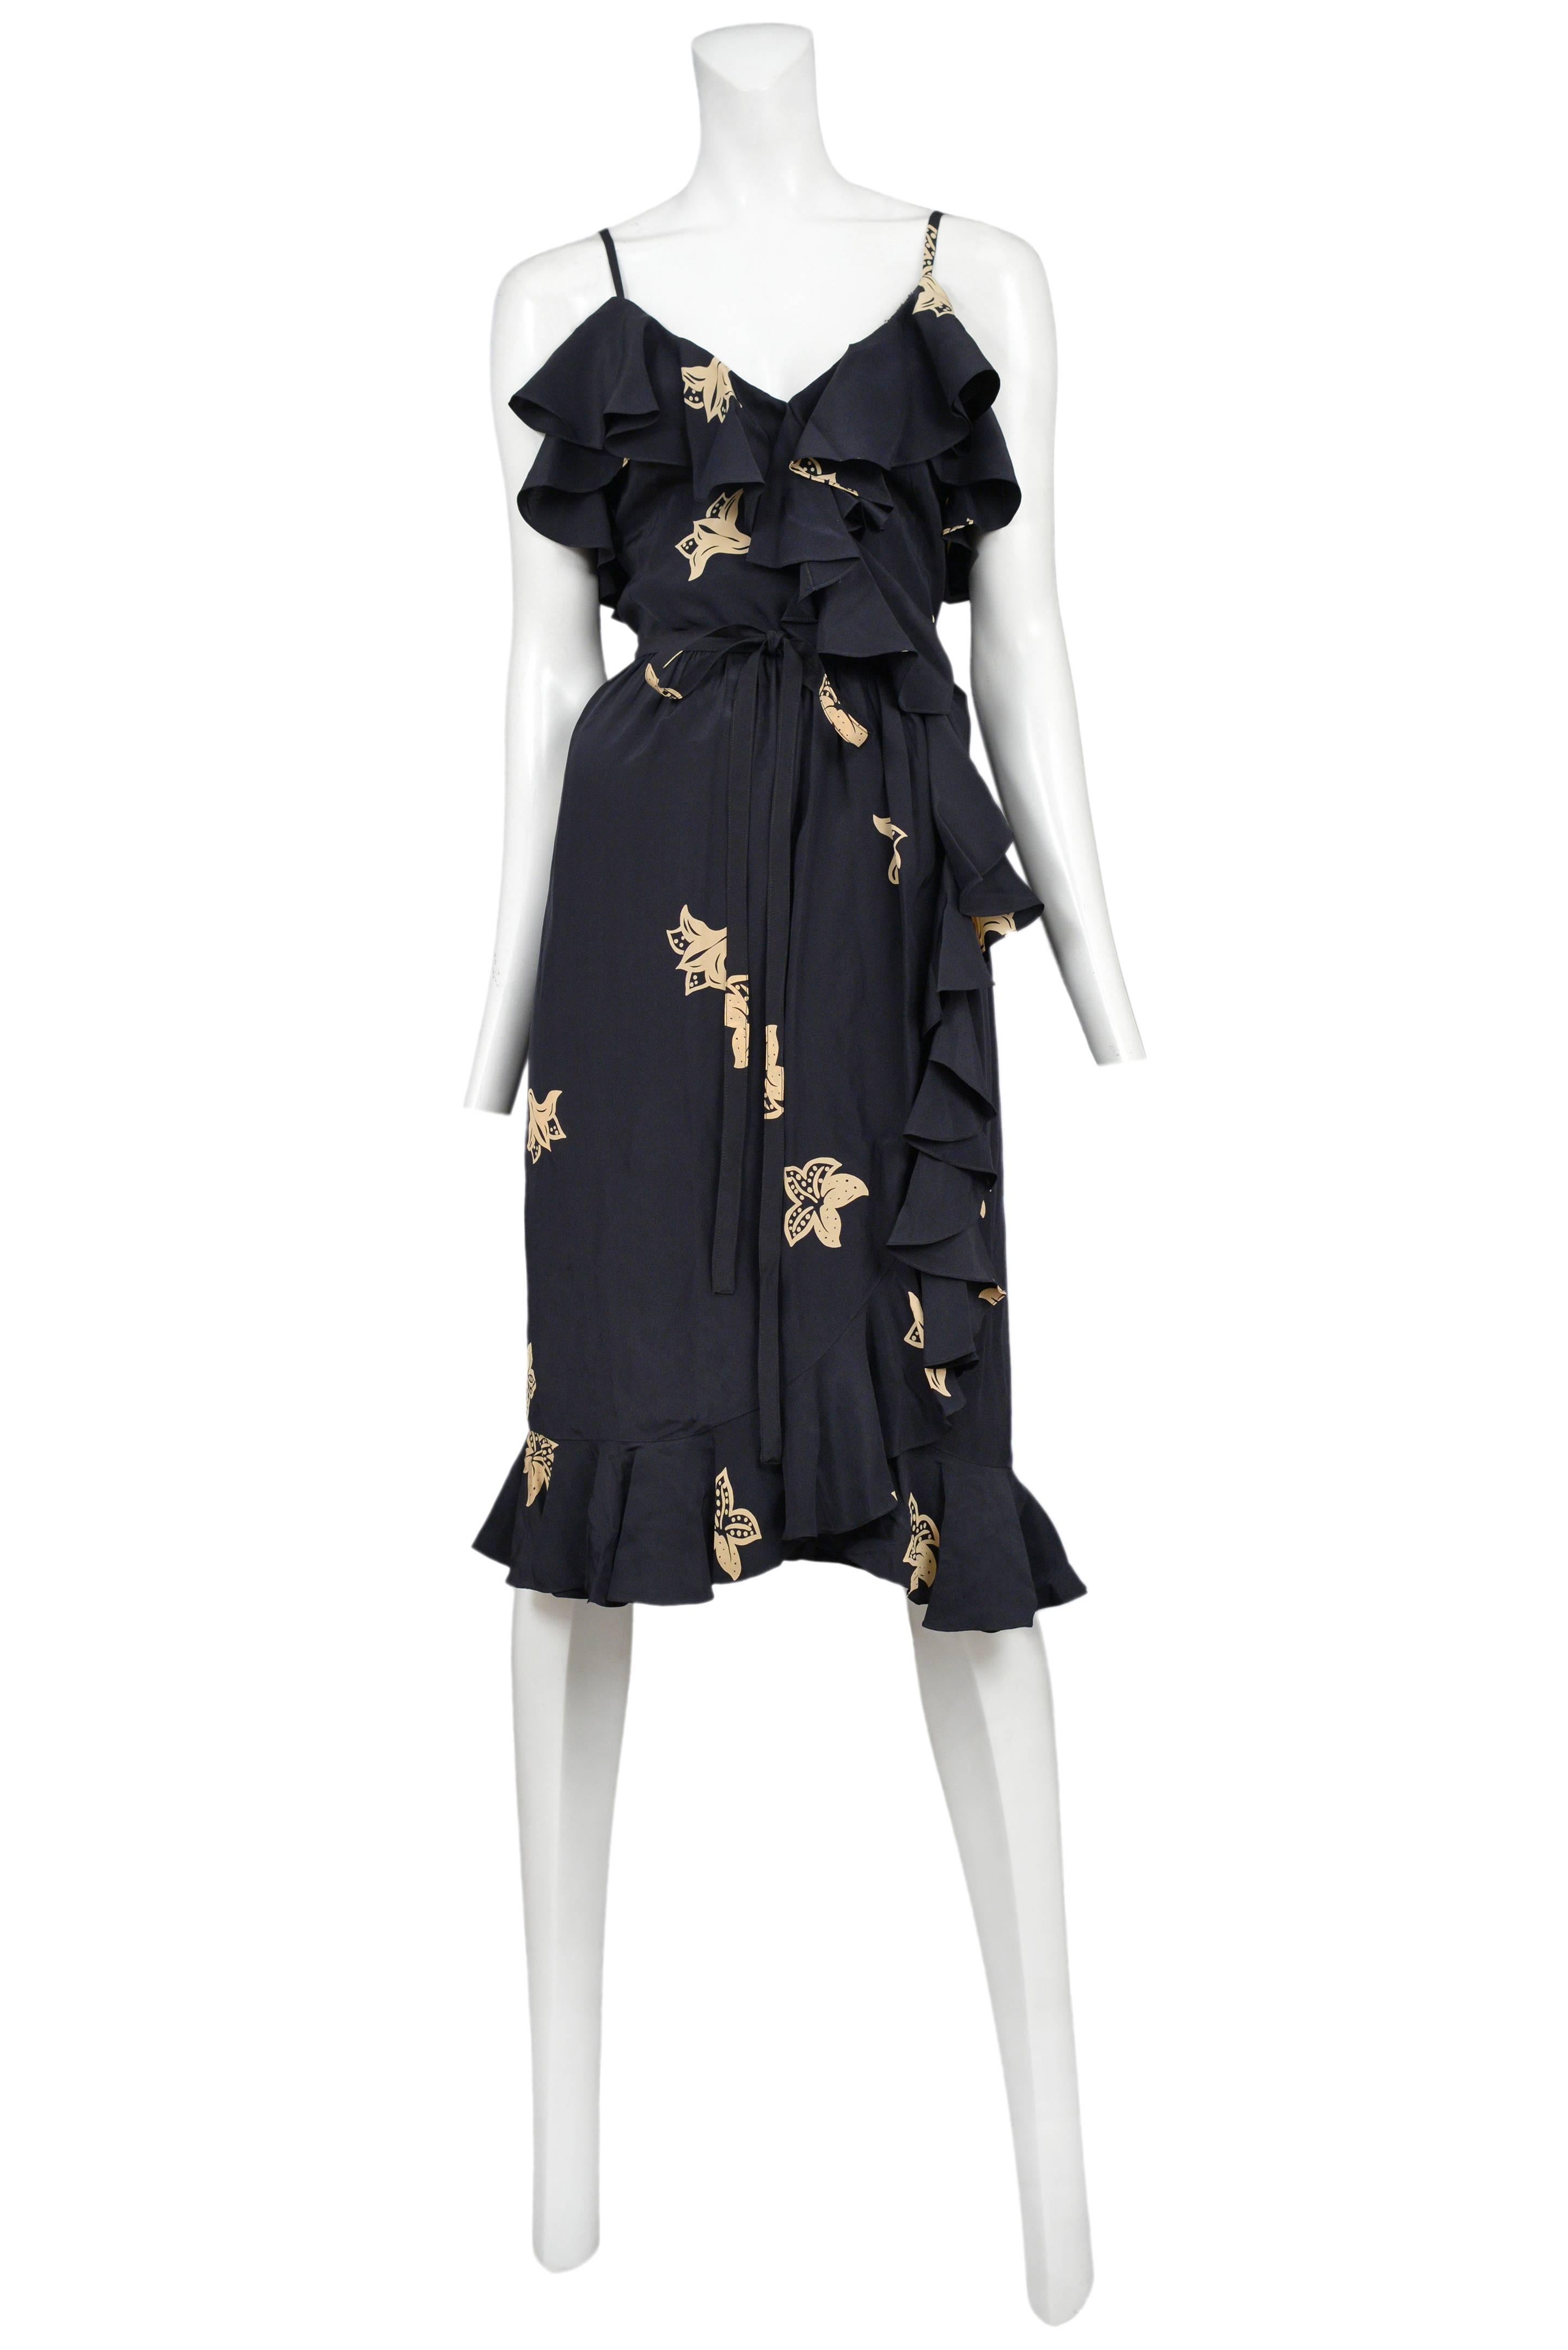 Vintage black silk ruffle dress featuring spaghetti straps, ruffles aligning the v-neckline and hem, matching waist ribbon and an allover cream floral print. The dress comes with a matching ruffle shawl. 
Please inquire for additional images.